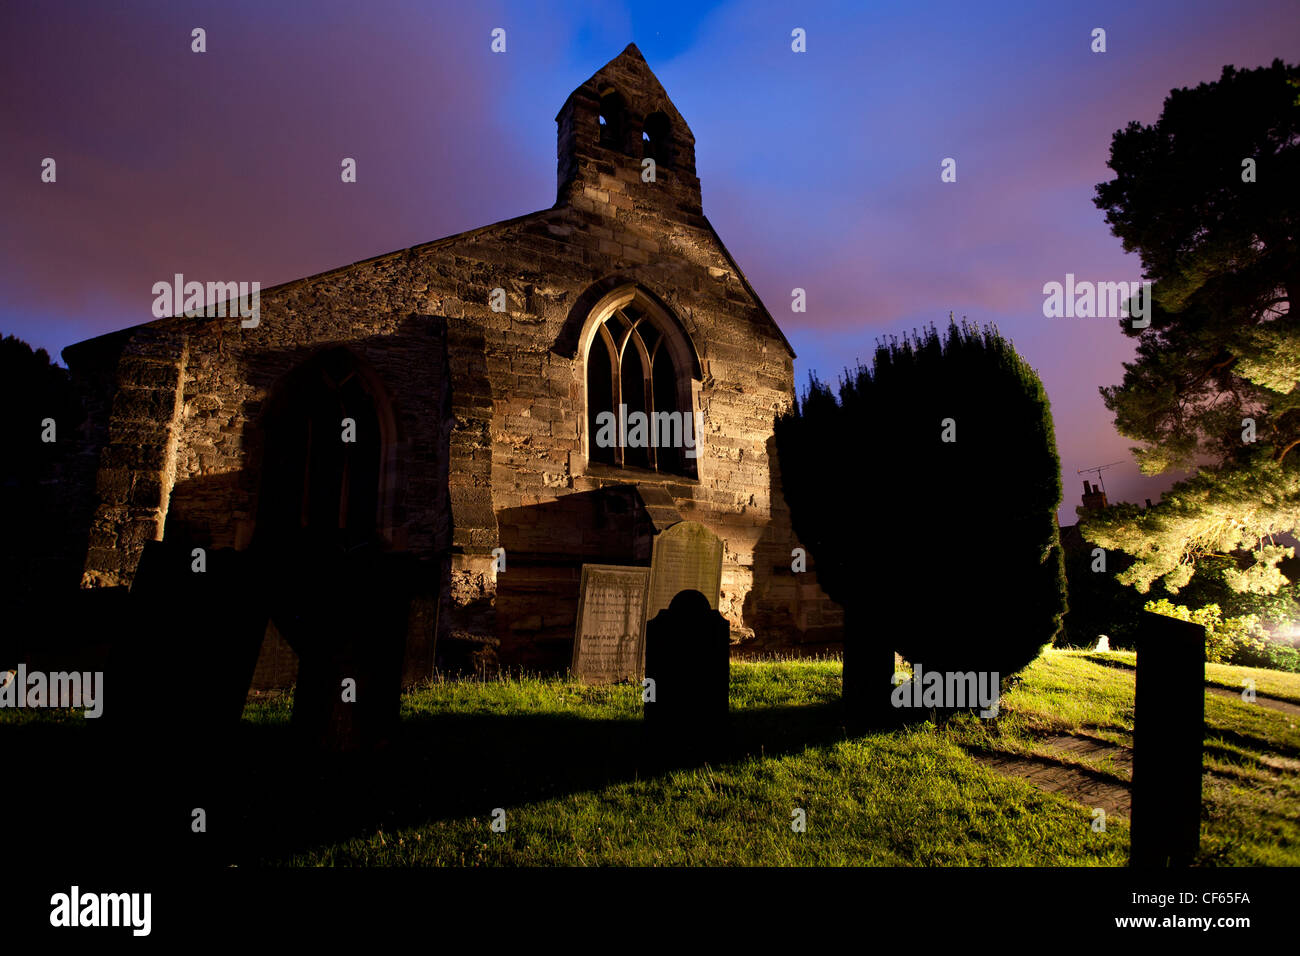 The exterior and graveyard of St. Anne's Church, a 12th century Grade II Listed building, at night. Stock Photo